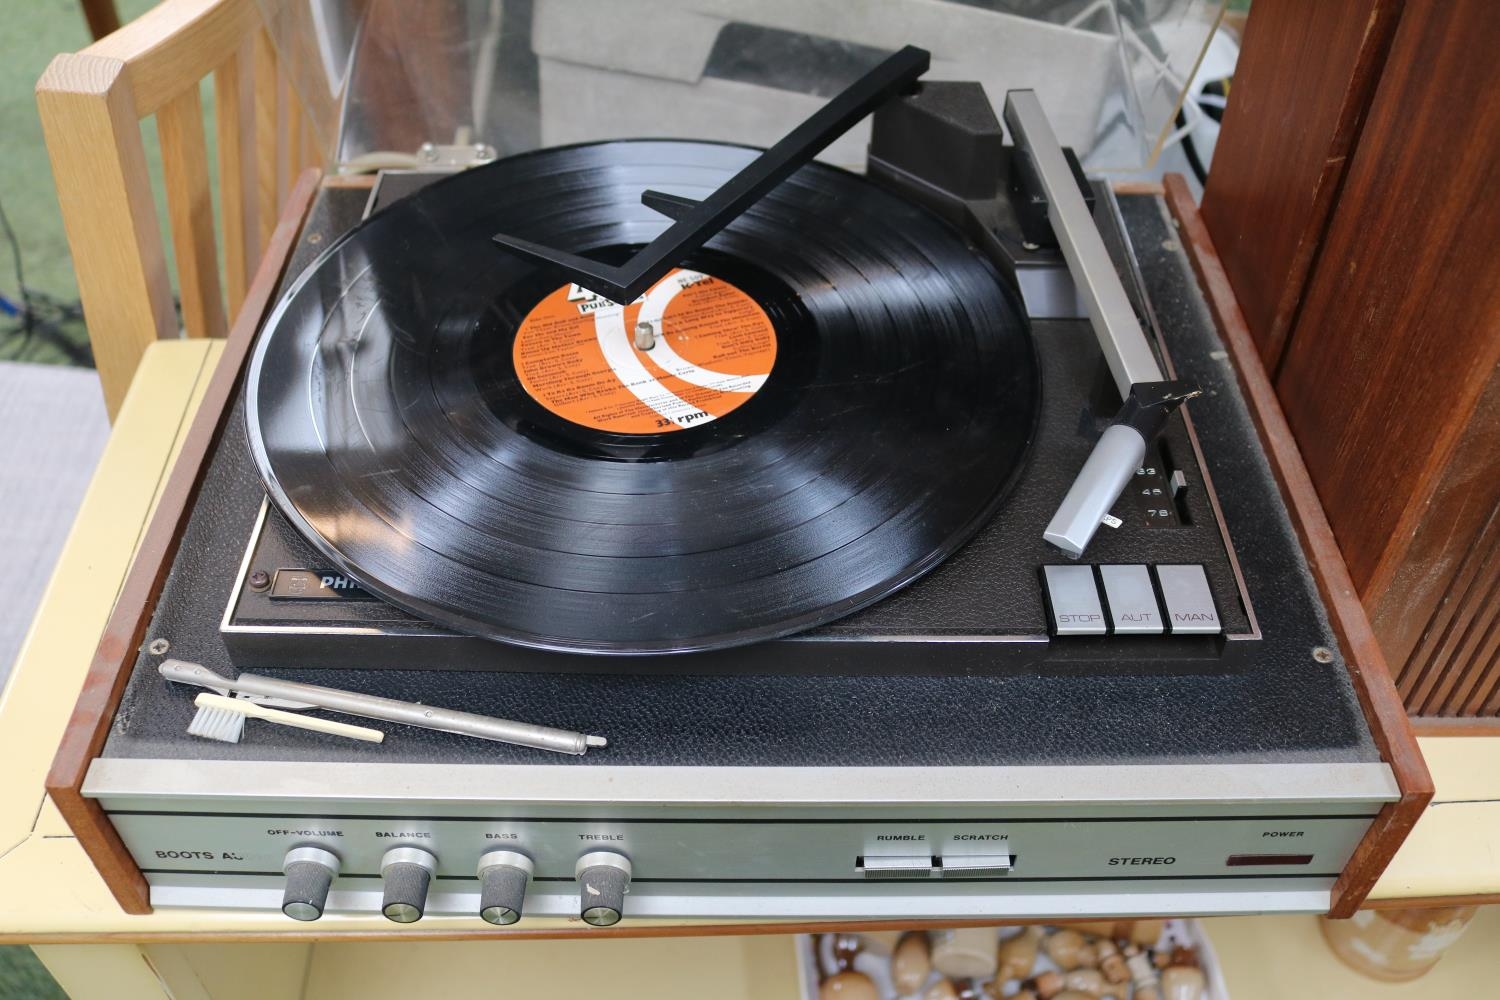 Phillips Boots Audio Stereo record Turntable with speakers and assorted Vintage Audio equipment - Image 2 of 2